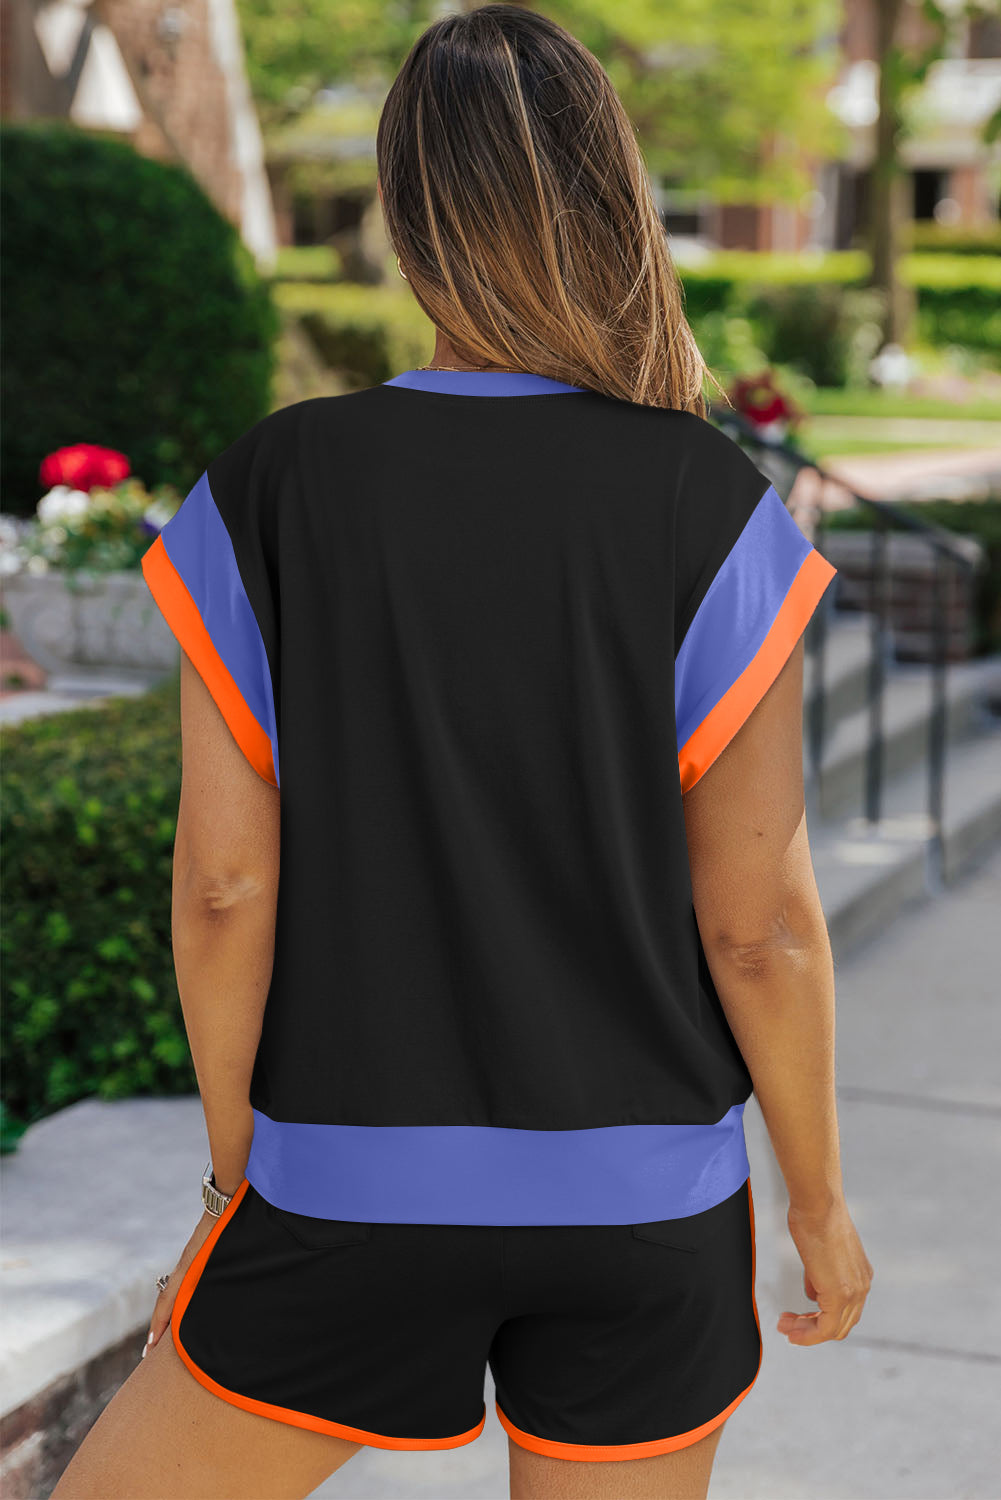 Sporty black and blue short-sleeve top and shorts